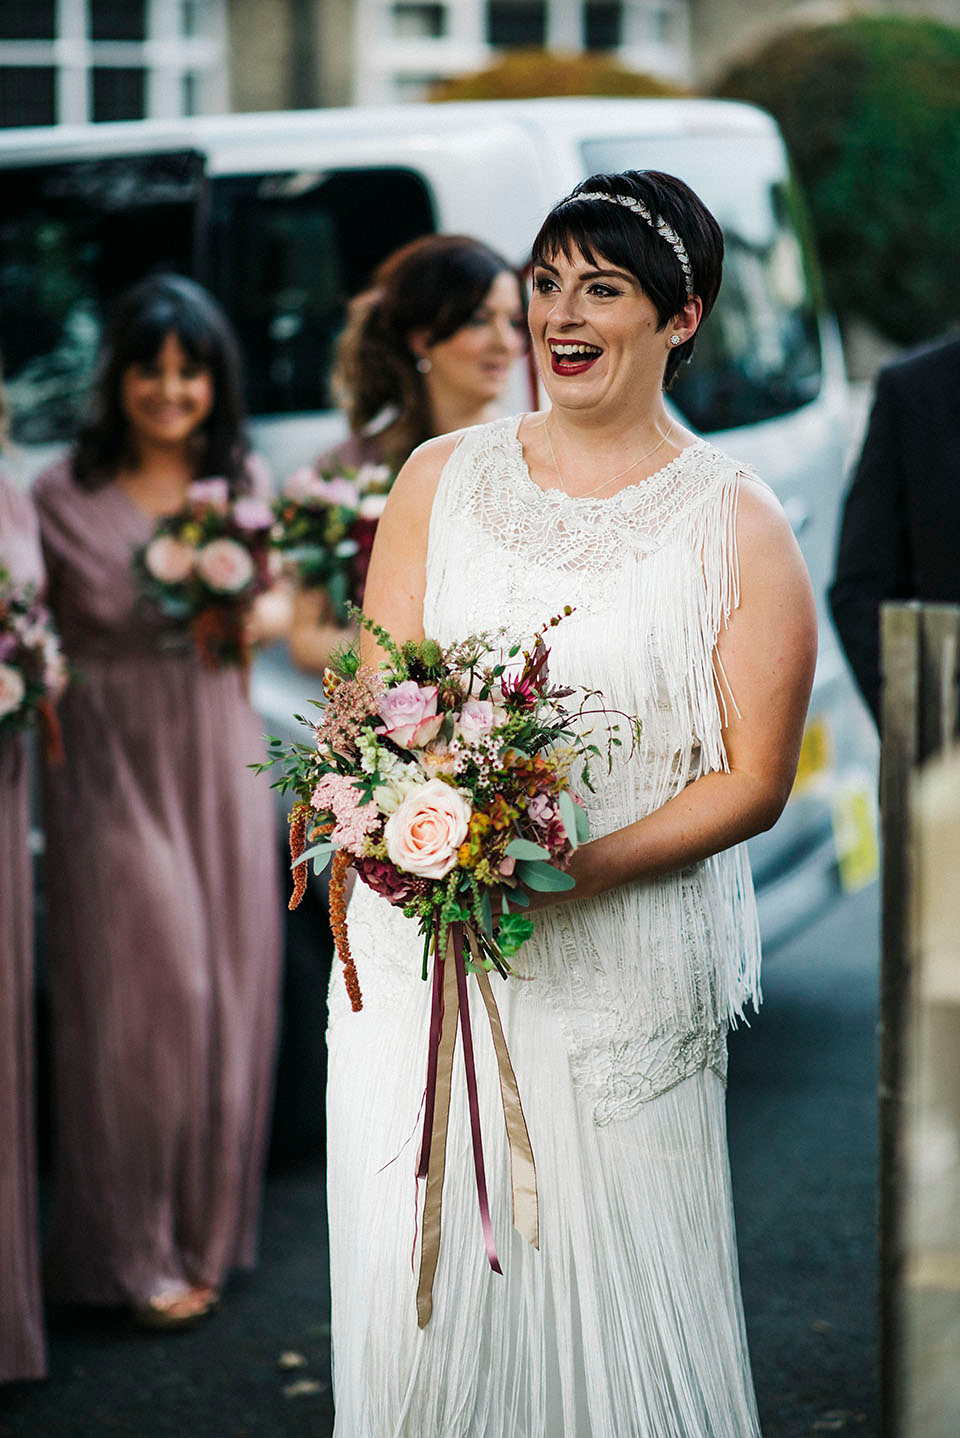 Hayley wore a 1920s tasseled dress by Phase Eight for her Autumn Wedding. Photography by Kerry Woods.